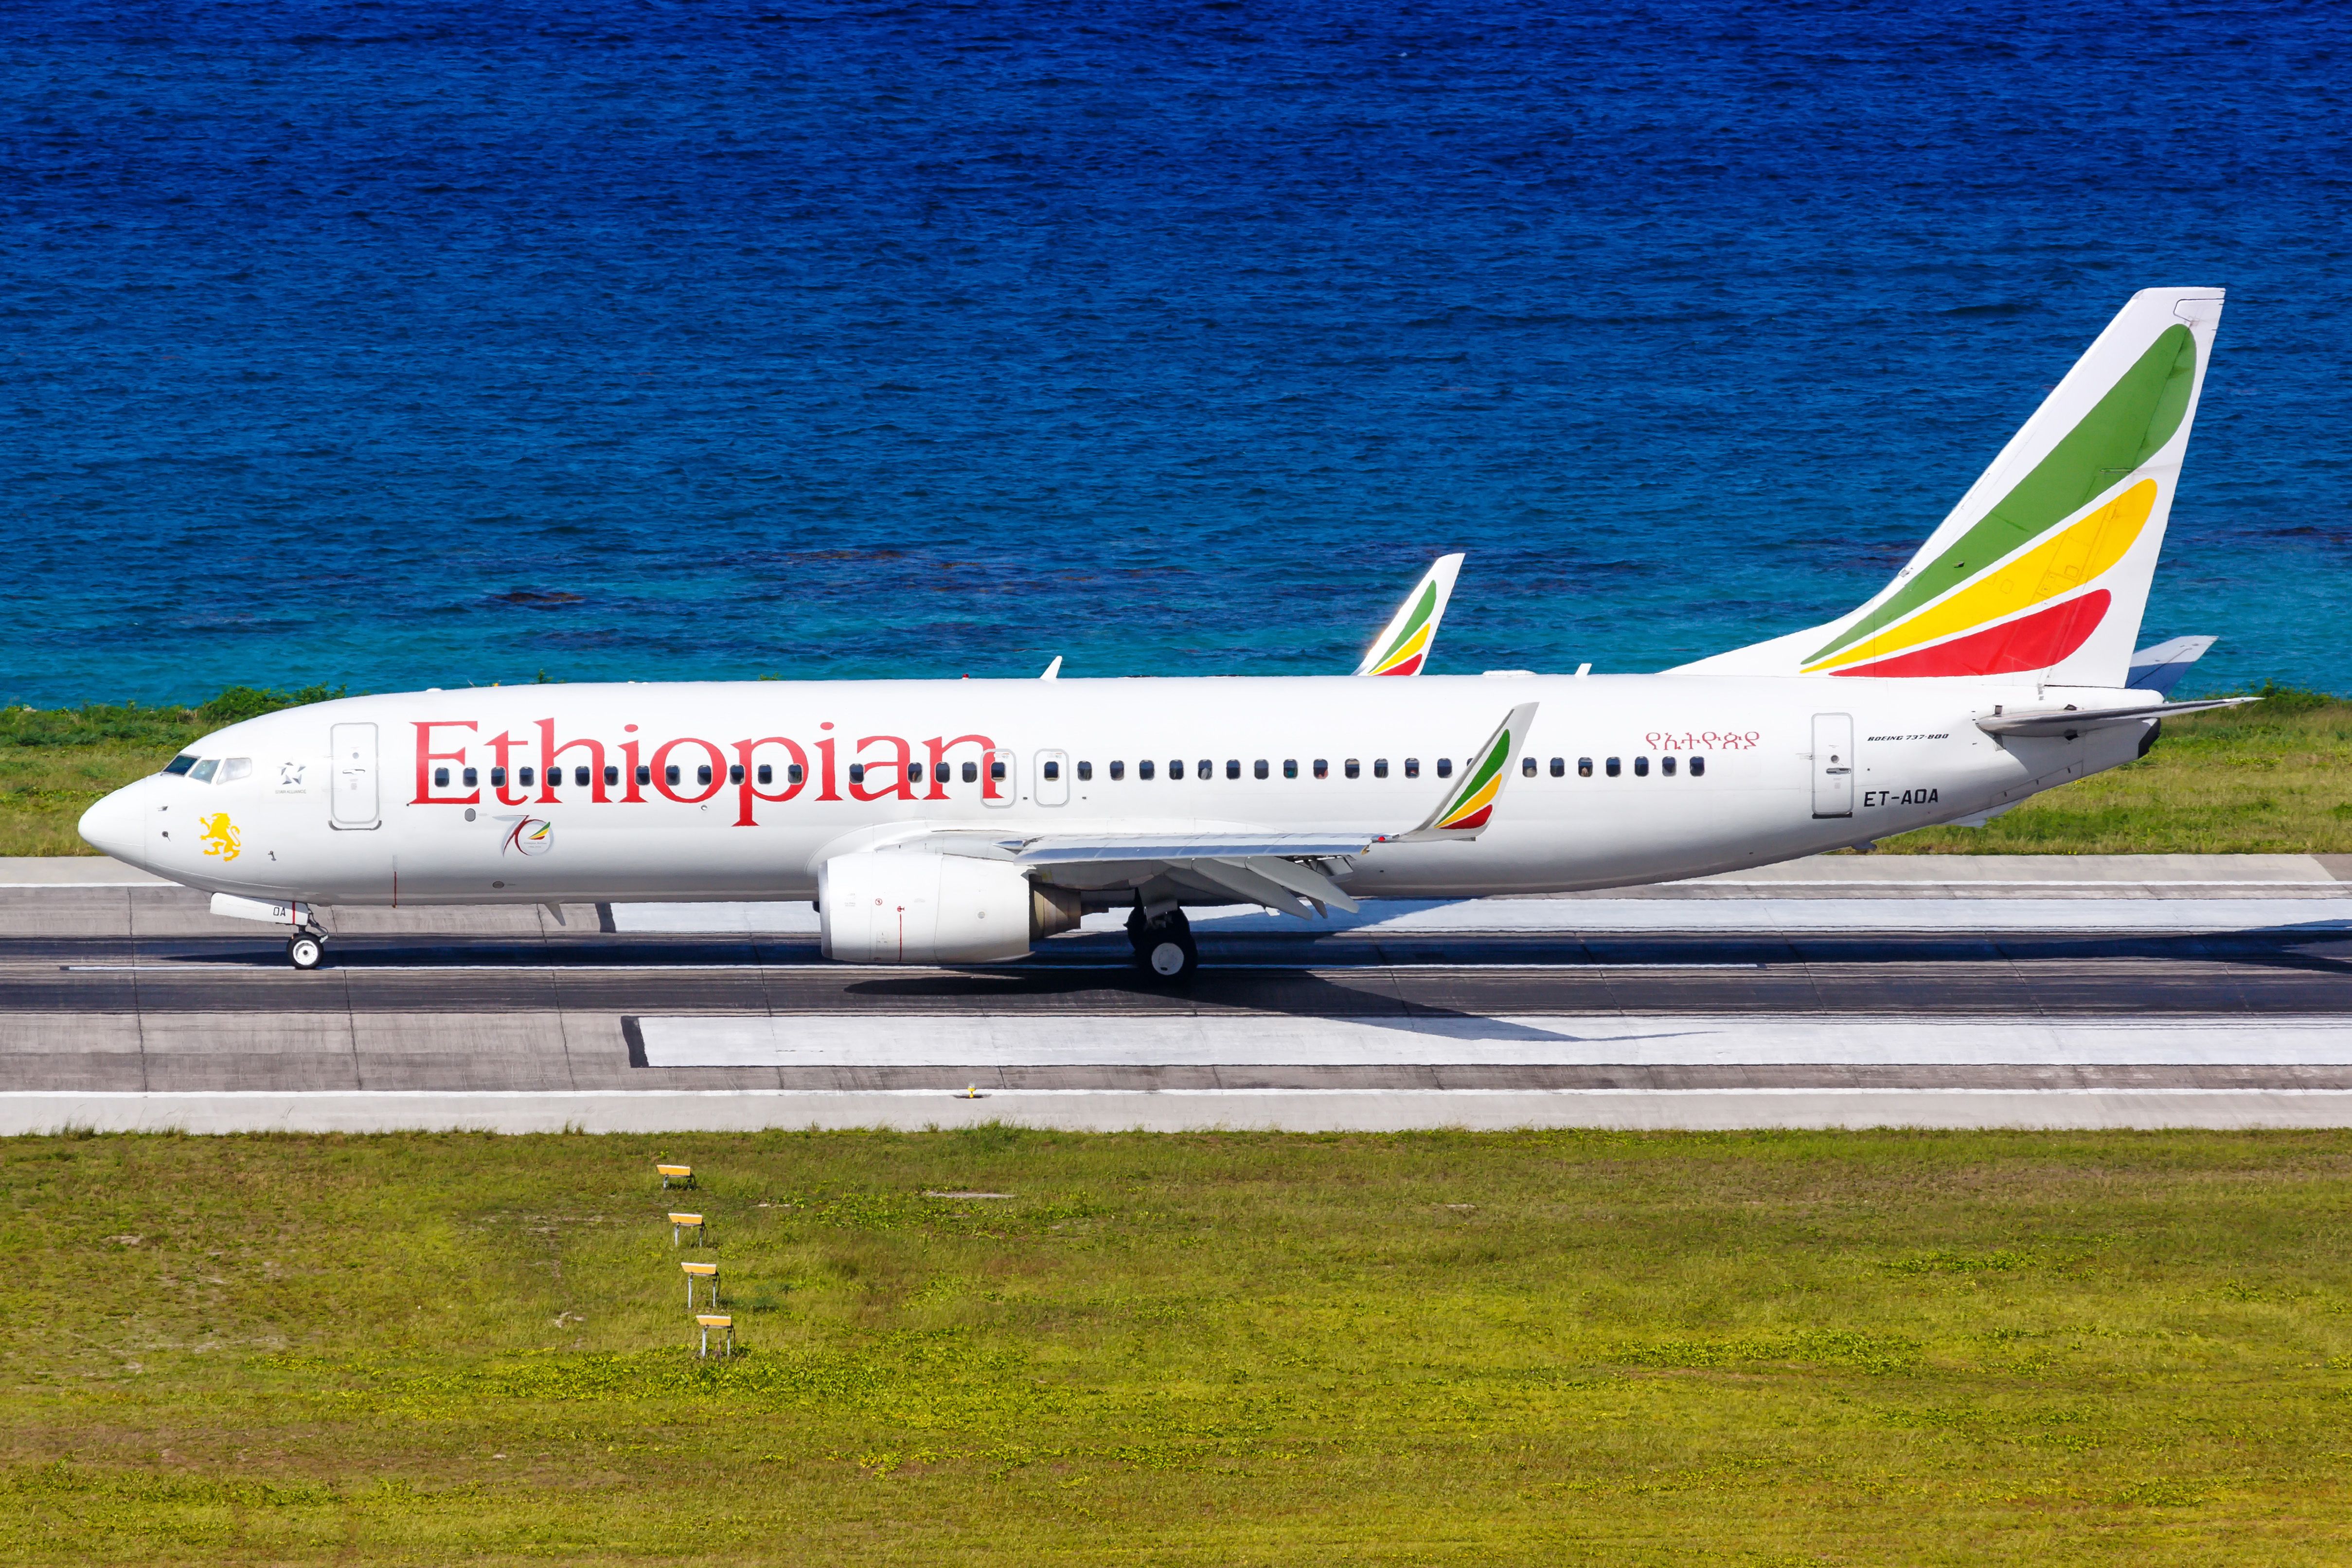 Ethiopian Airlines Boeing 737-800 airplane at Seychelles International Airport (SEZ)